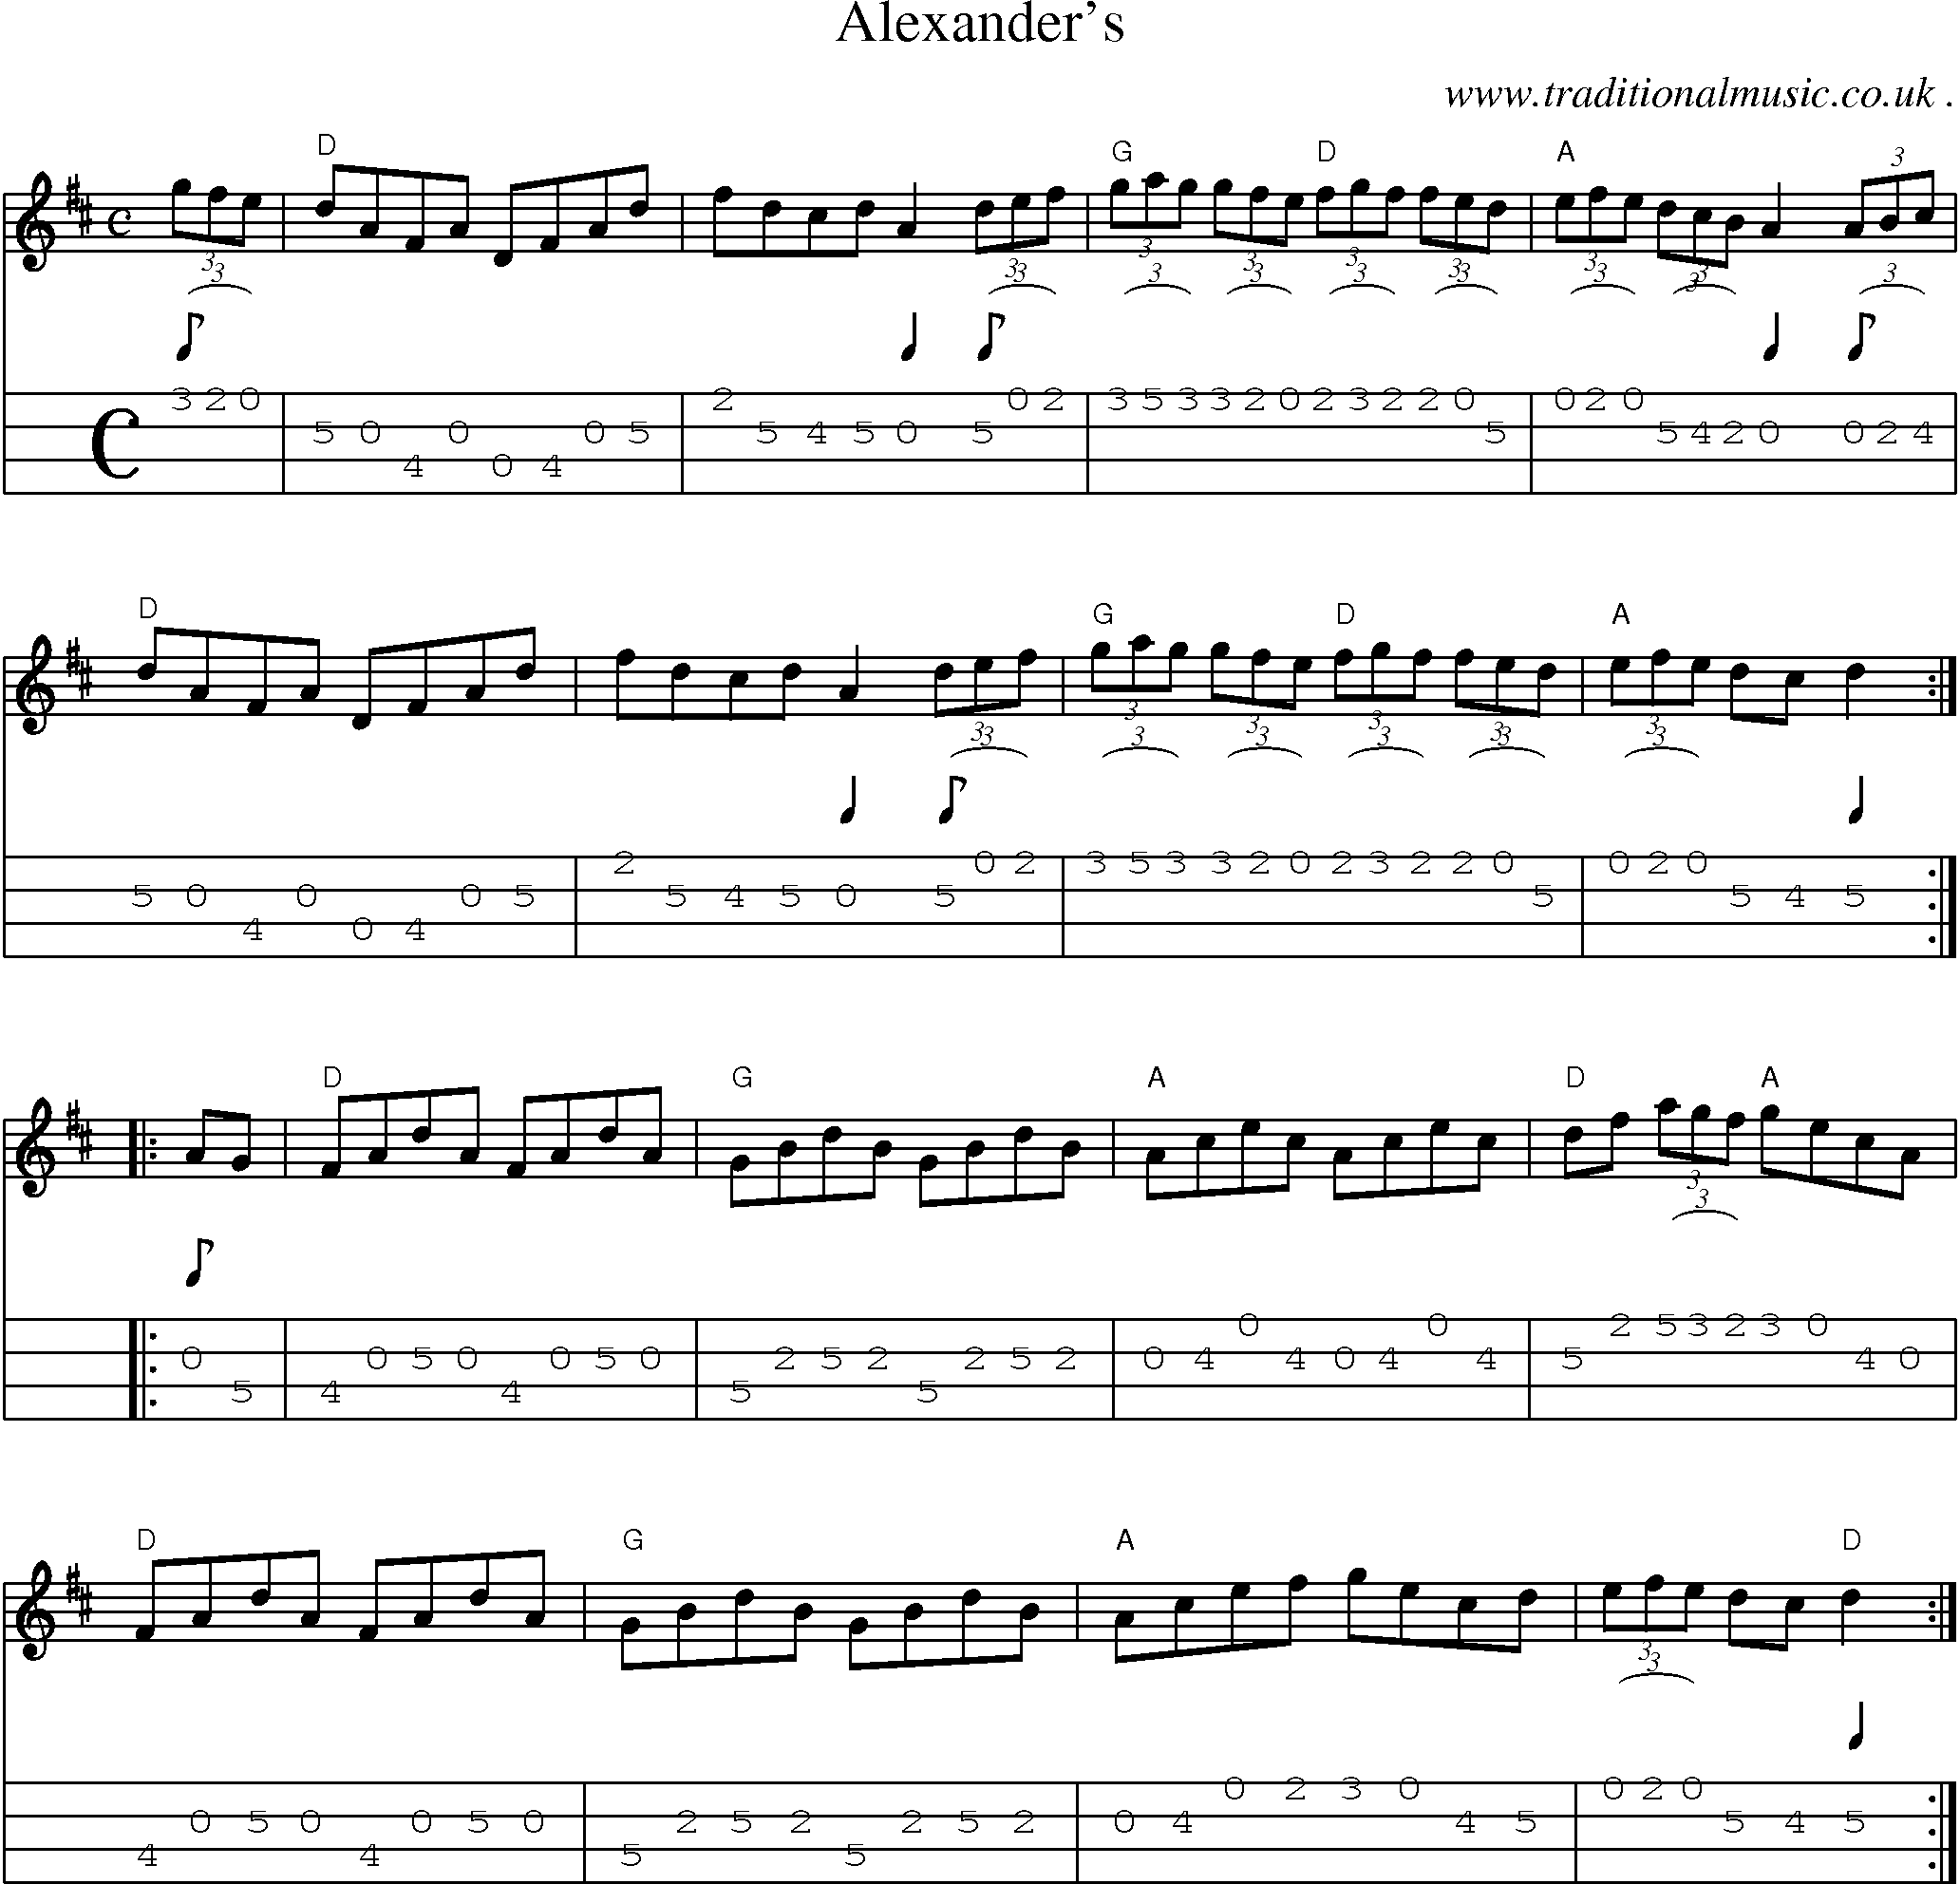 Music Score and Guitar Tabs for Alexanders